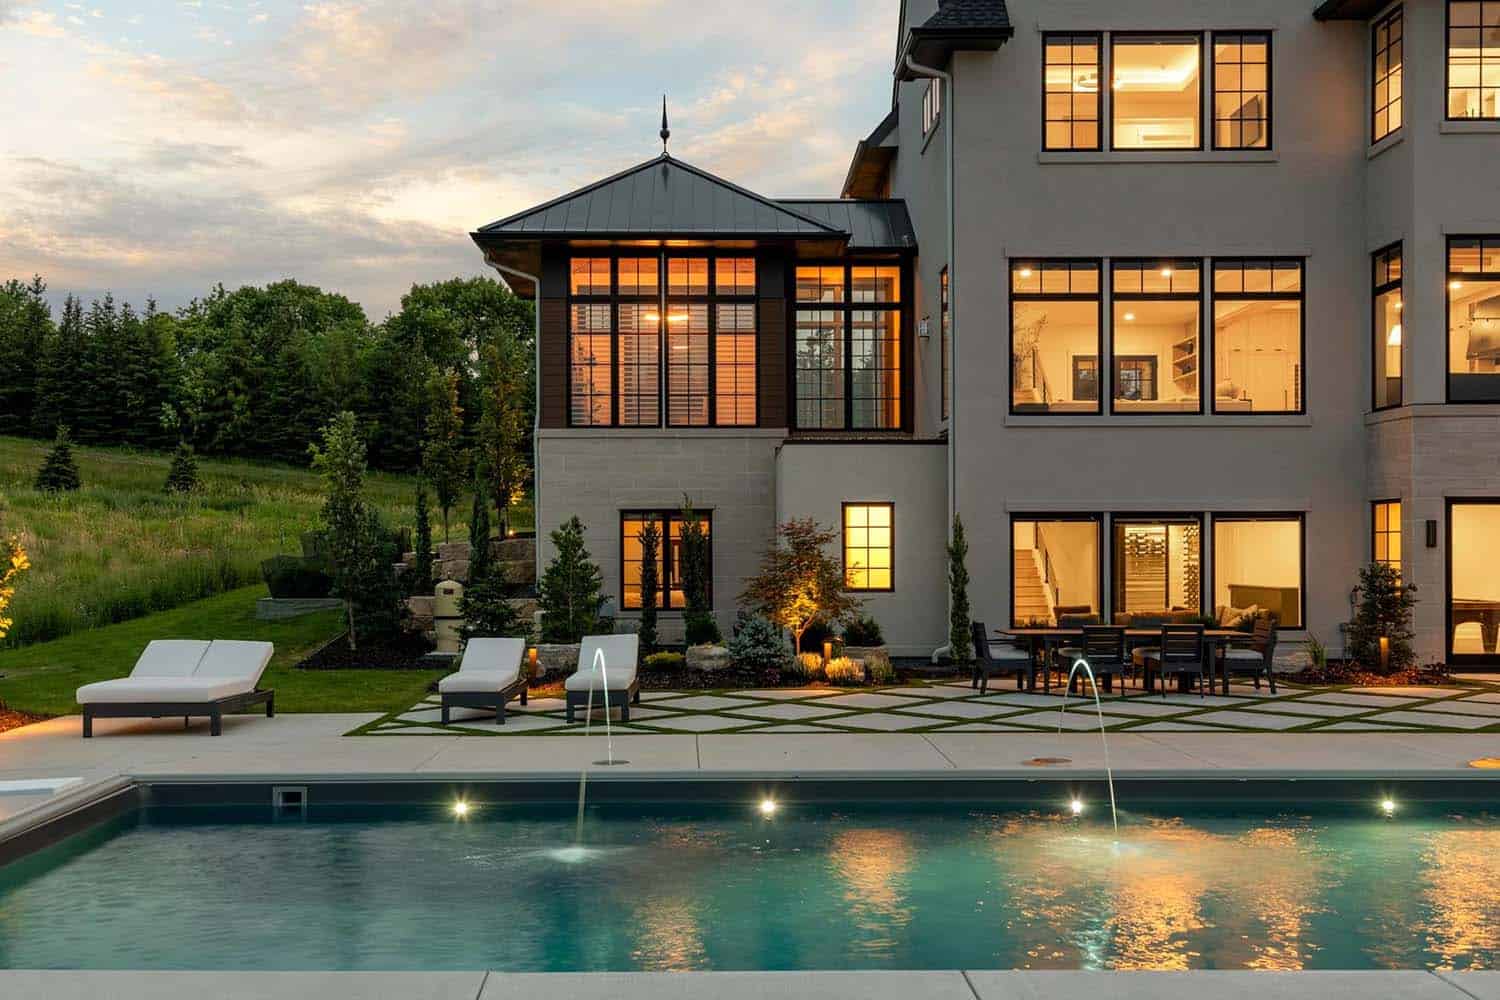 modern home exterior with a swimming pool at dusk